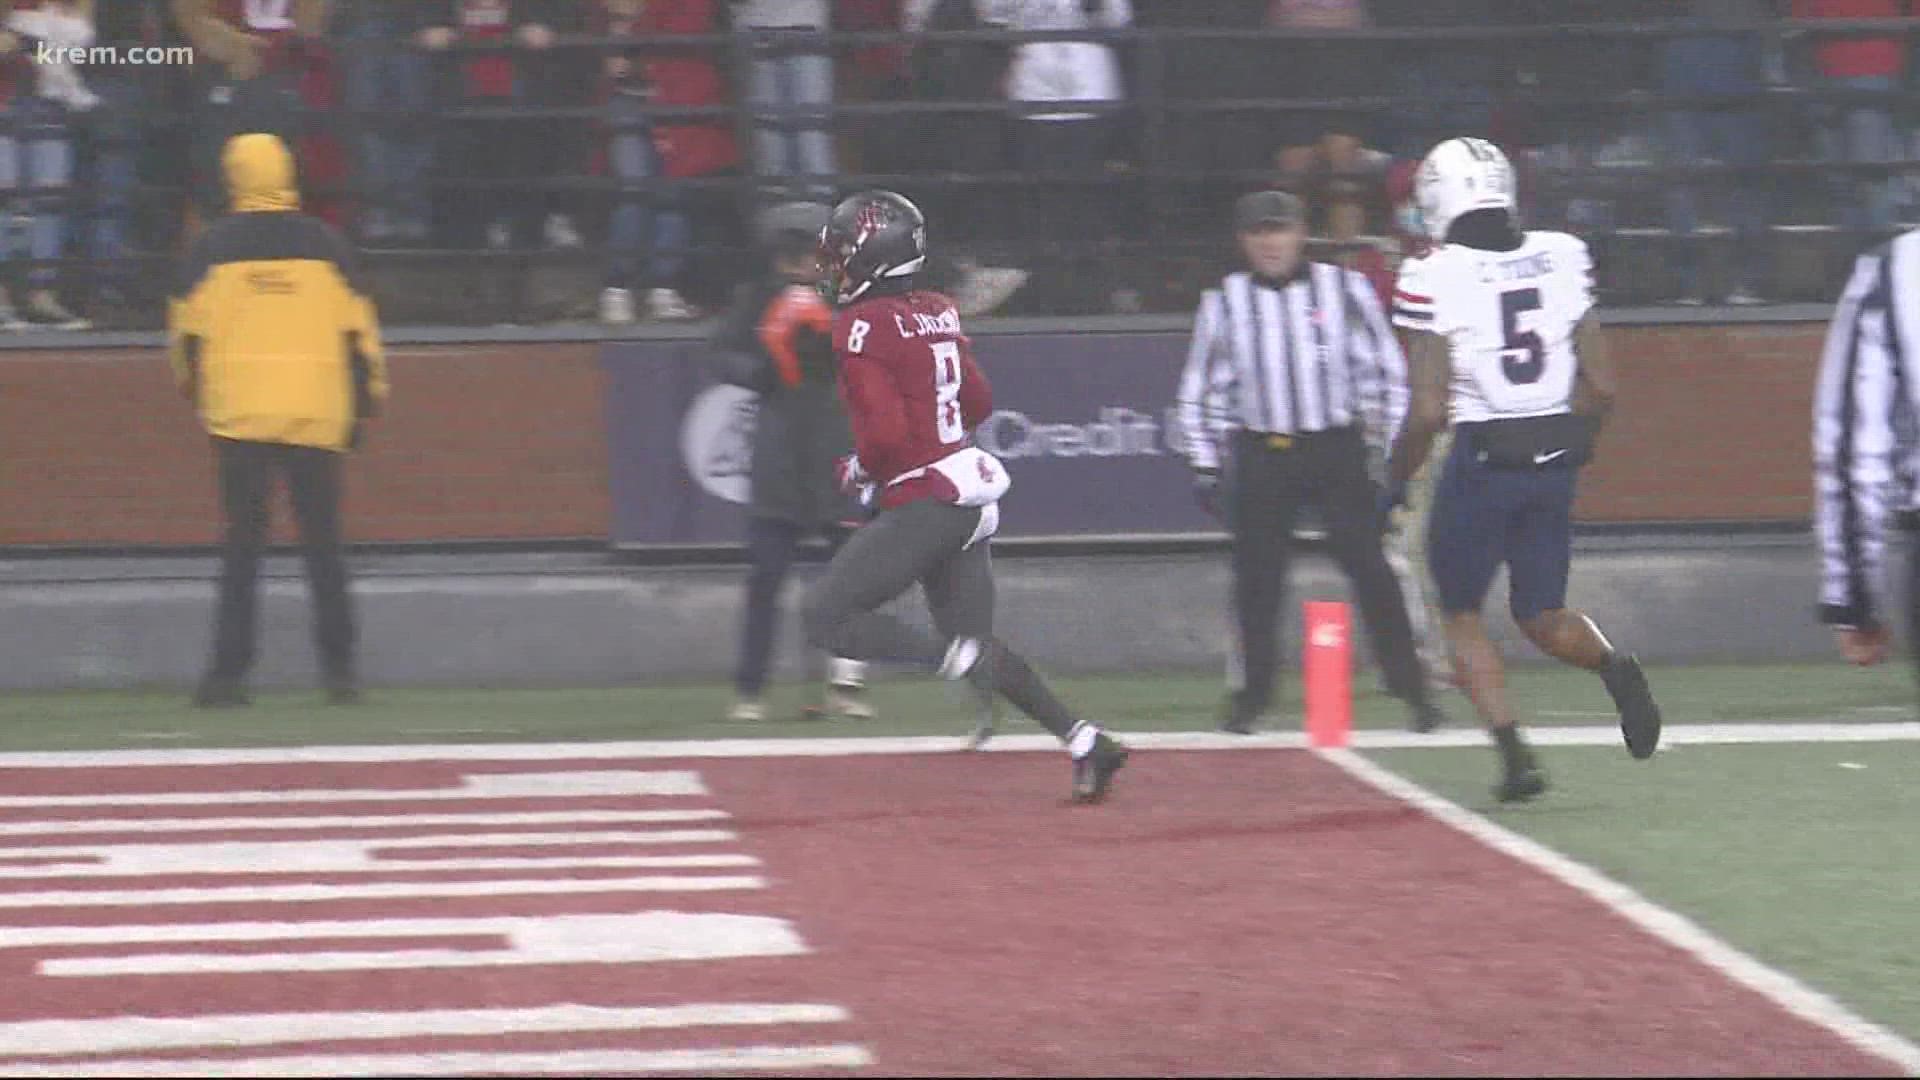 This game will be a rematch of the 2015 Sun Bowl, where the Cougars won 20-14 under former head coach Mike Leach. The game will air on KREM 2 on New Year's Eve.